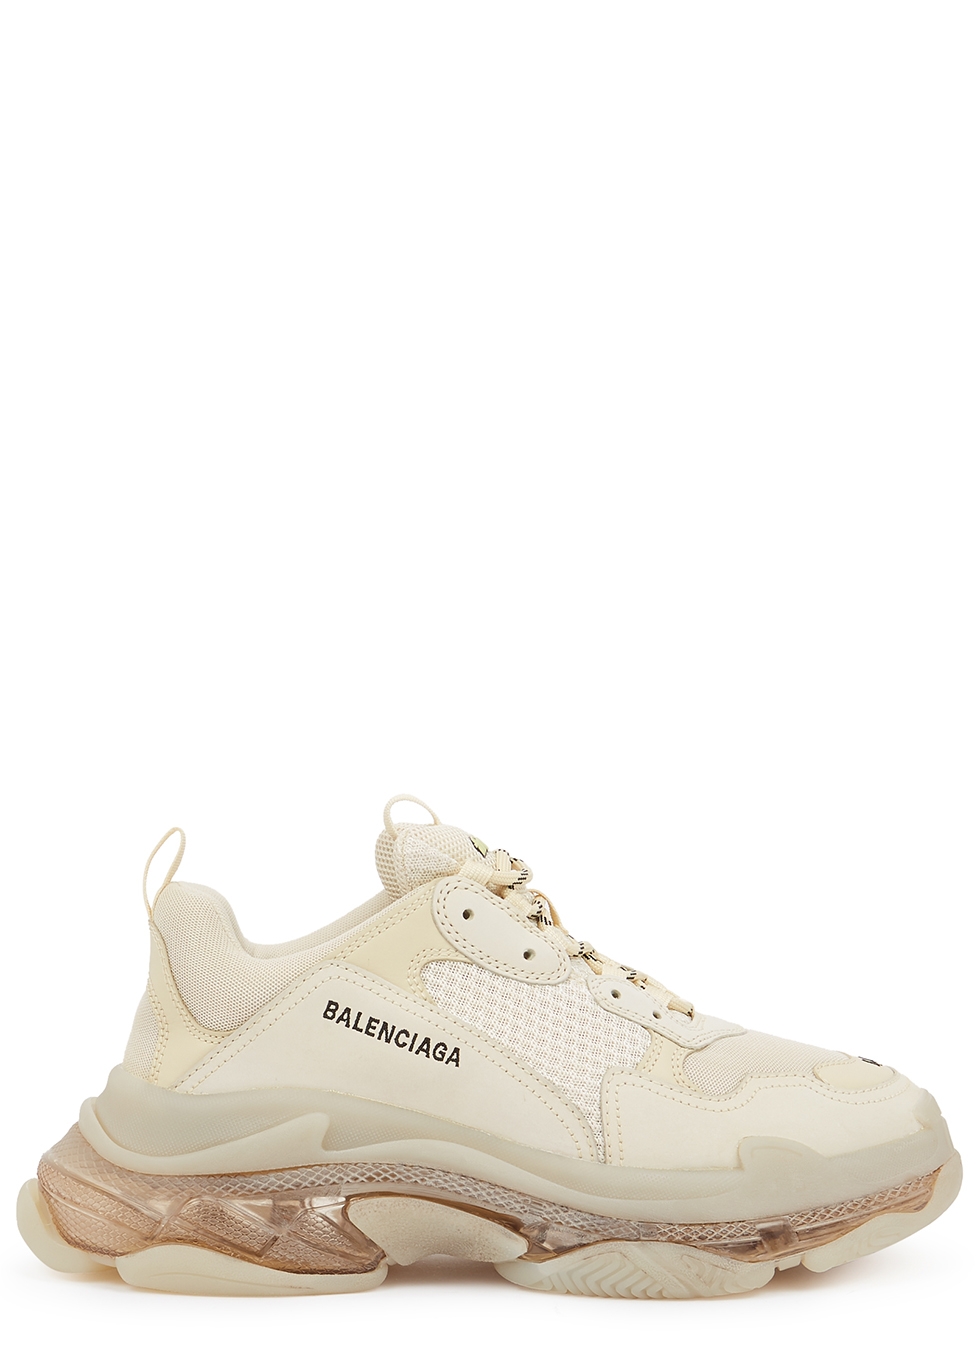 Balenciaga Triple S Leather Suede Sneaker in White Save